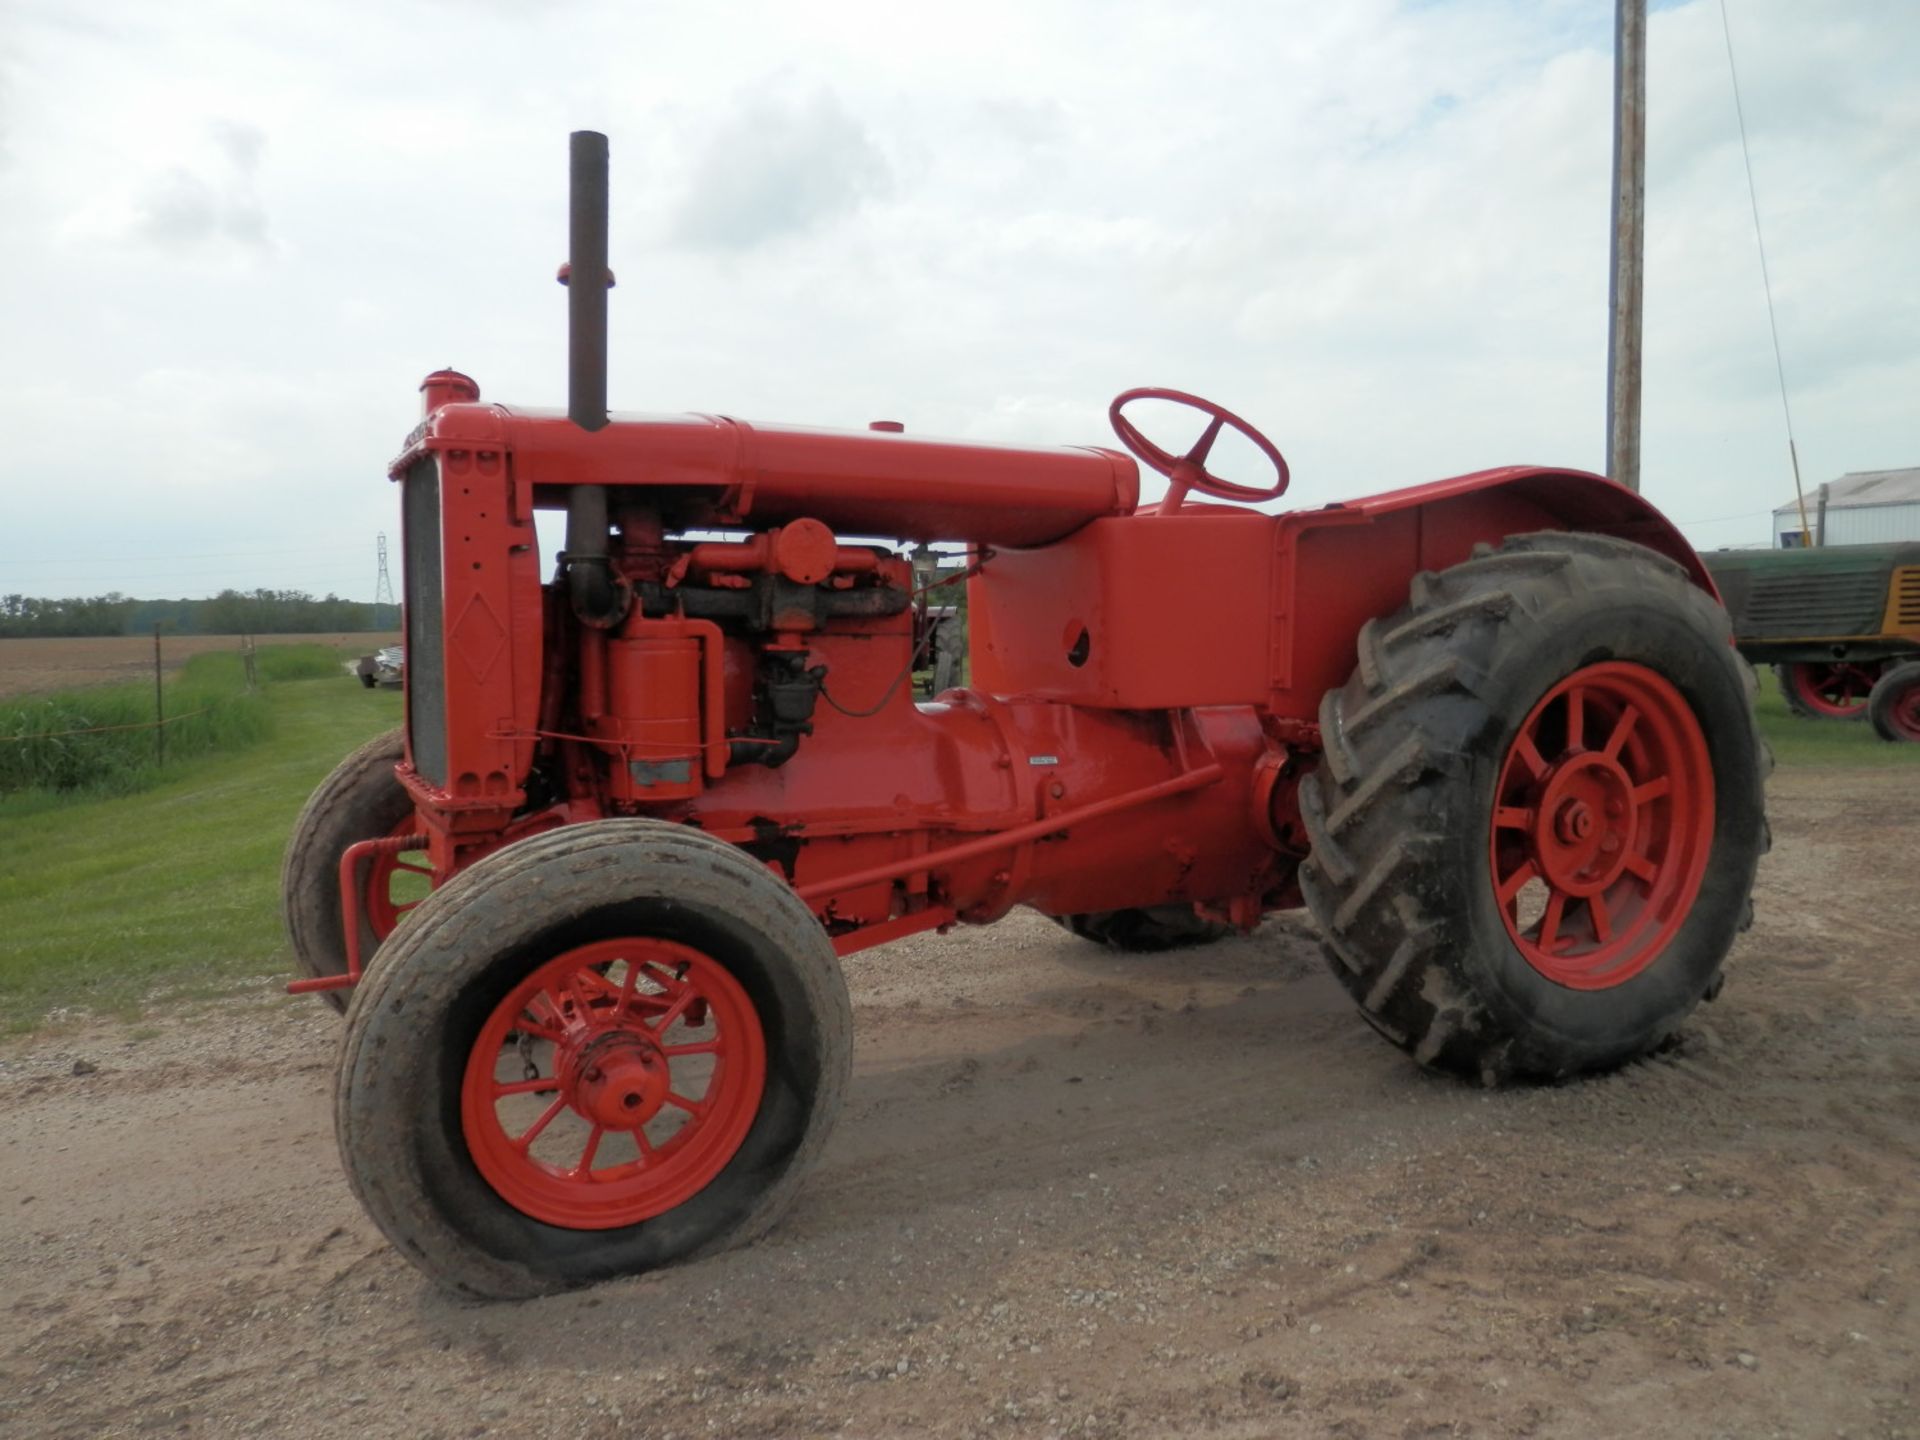 ALLIS CHALMERS "U" TRACTOR - Image 3 of 6